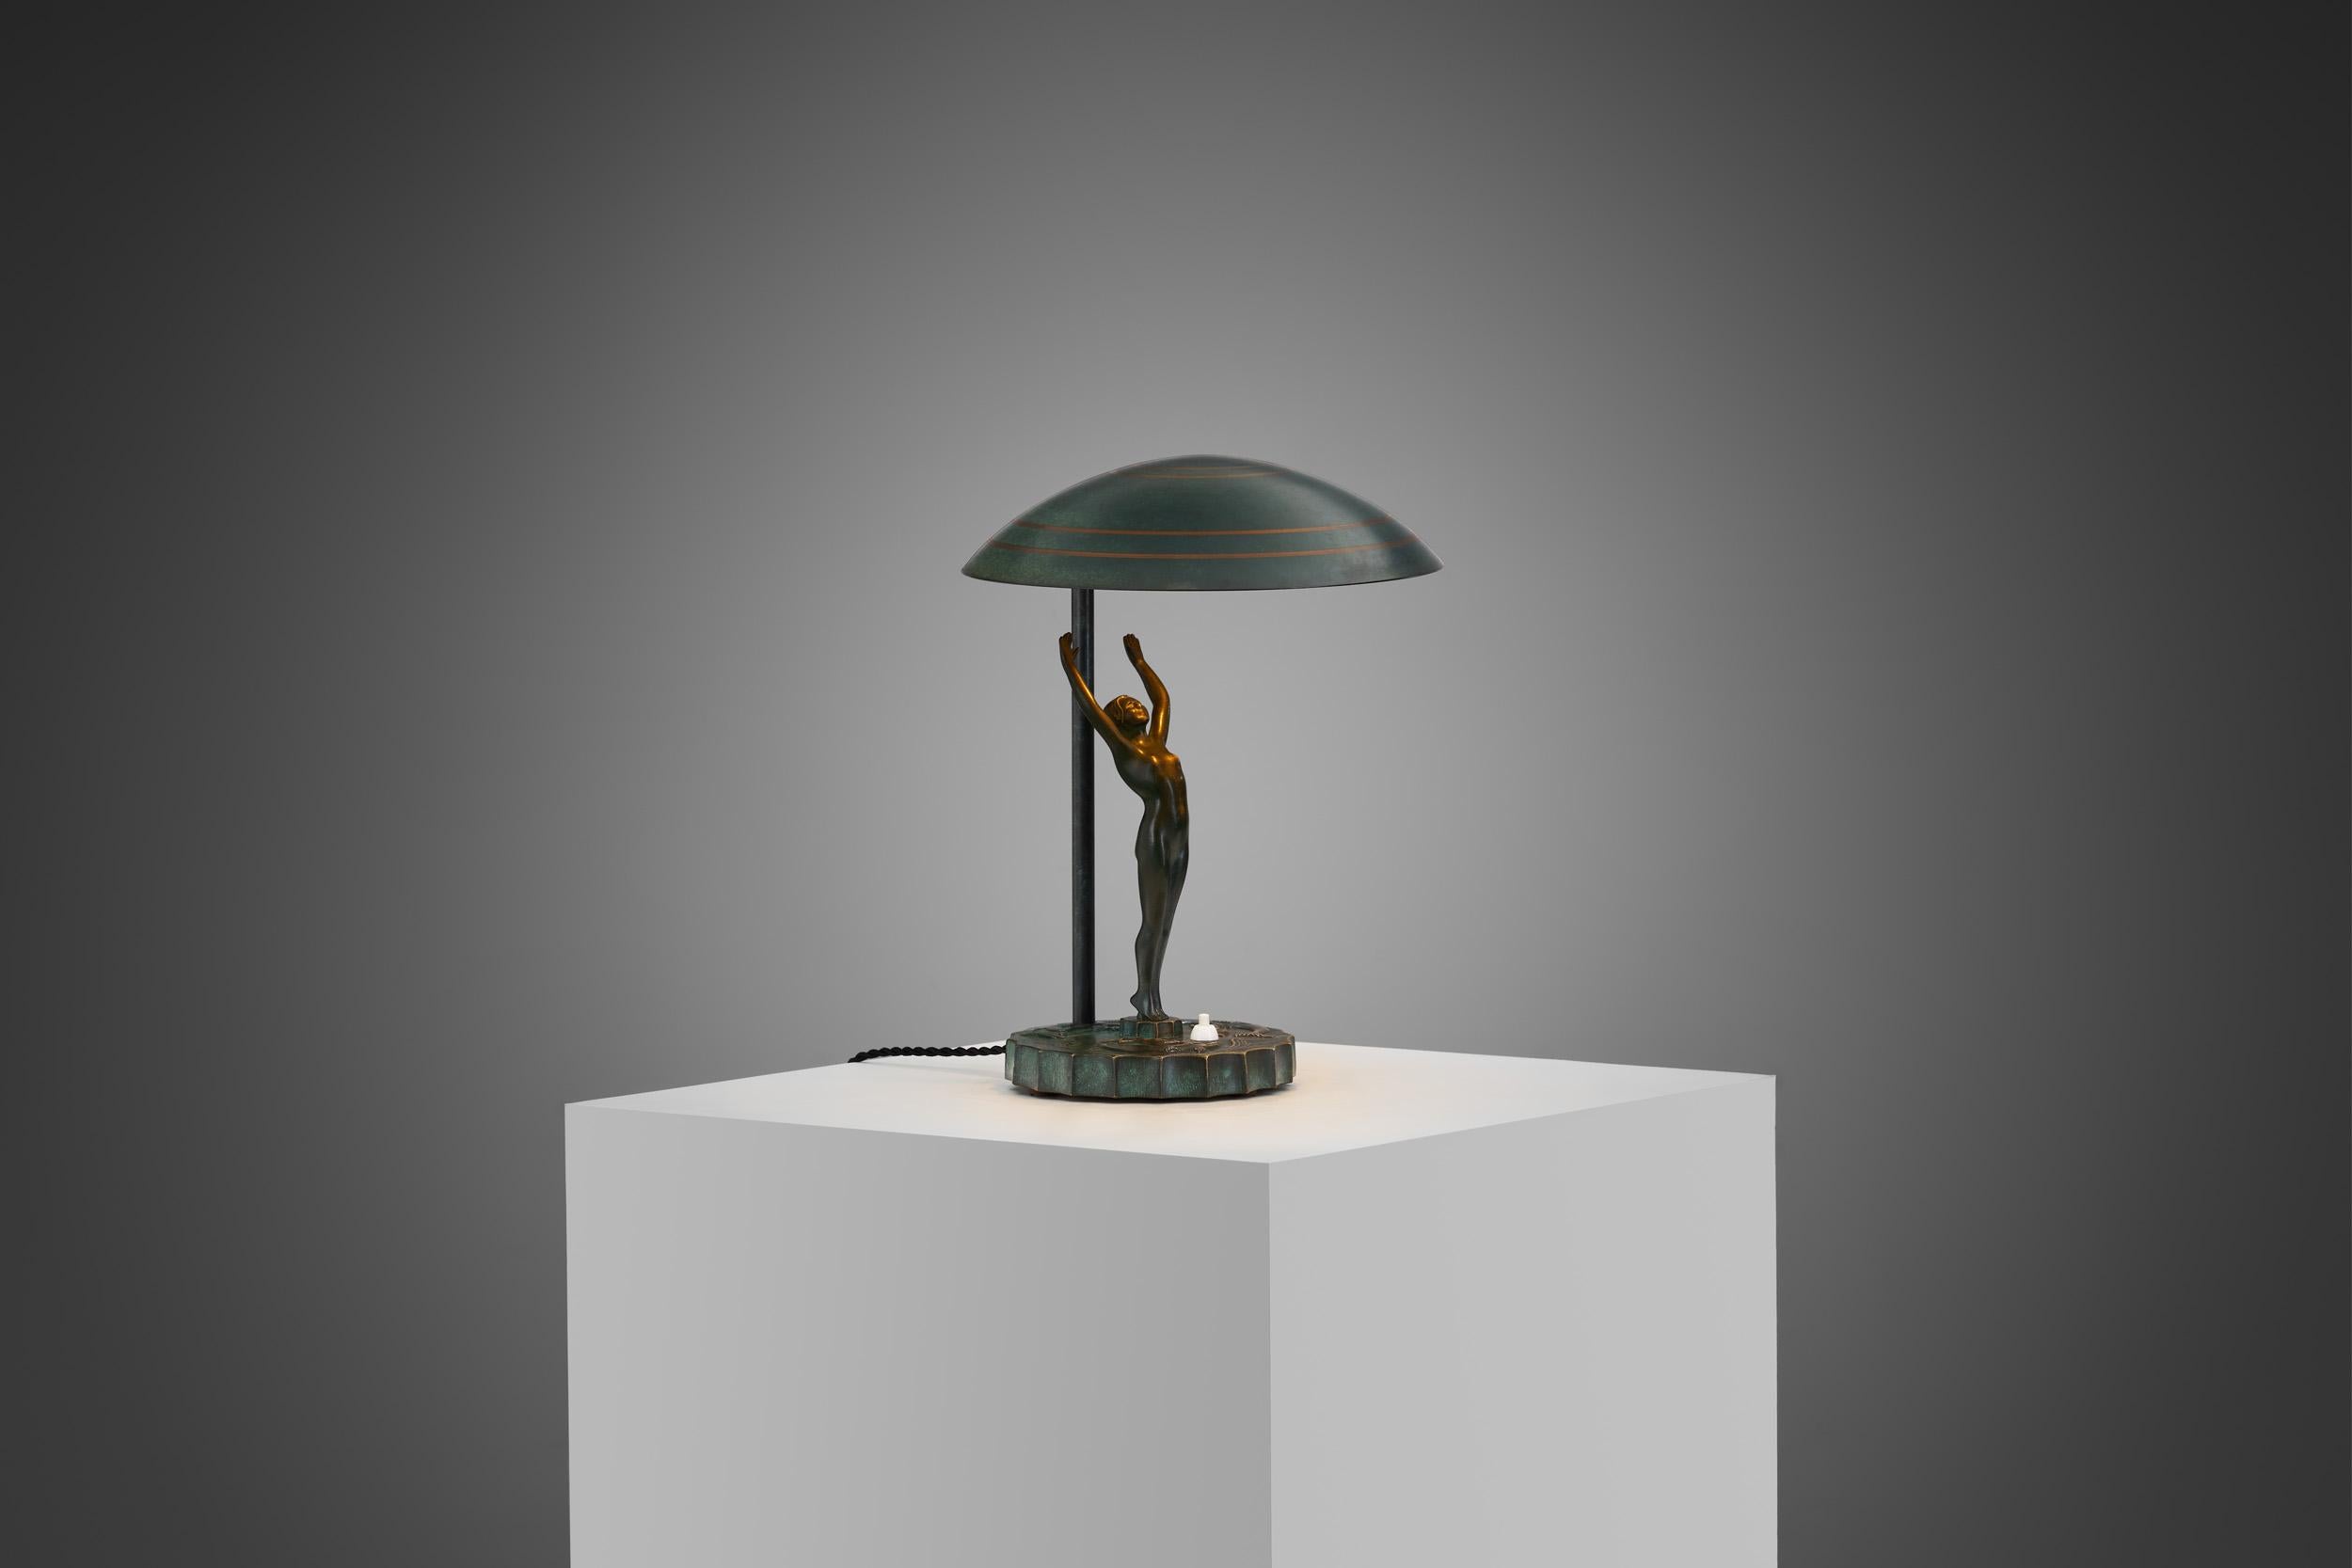 Bronze Art Deco Table Lamp, Europe ca 1930s For Sale 1